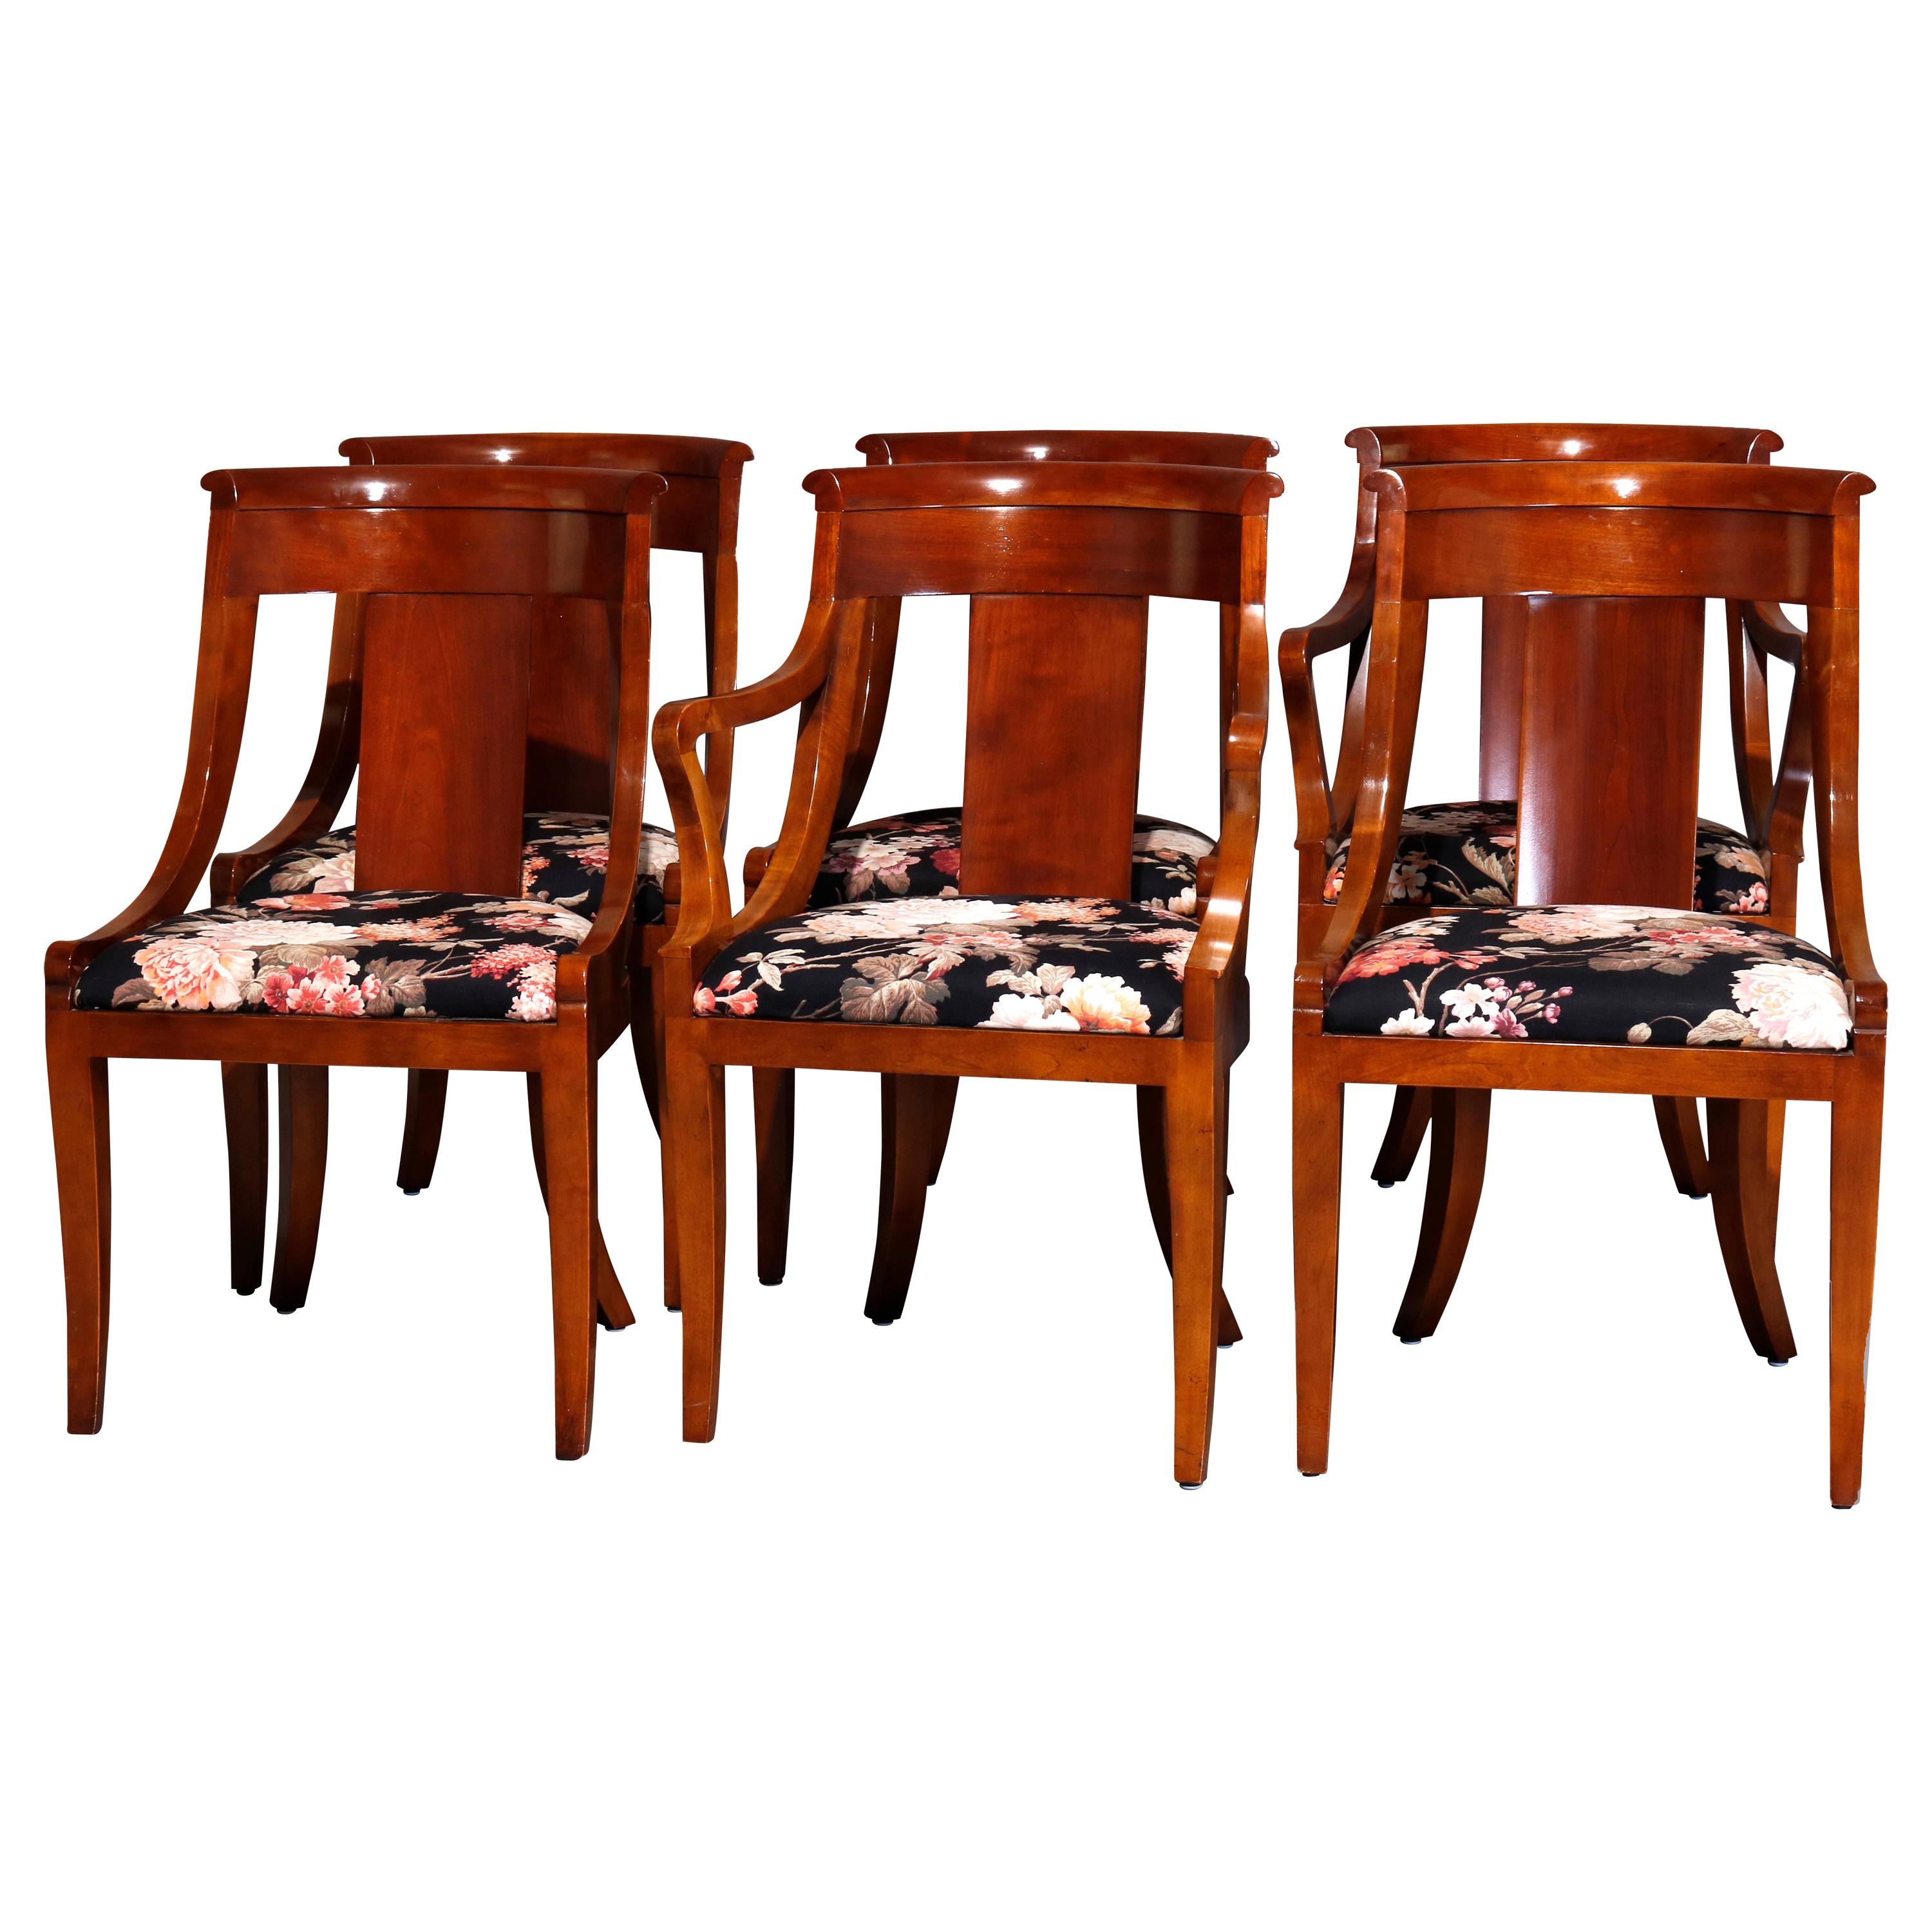 Six Vintage Flame Mahogany Gondola Dining Chairs by Baker Furniture 20th Century